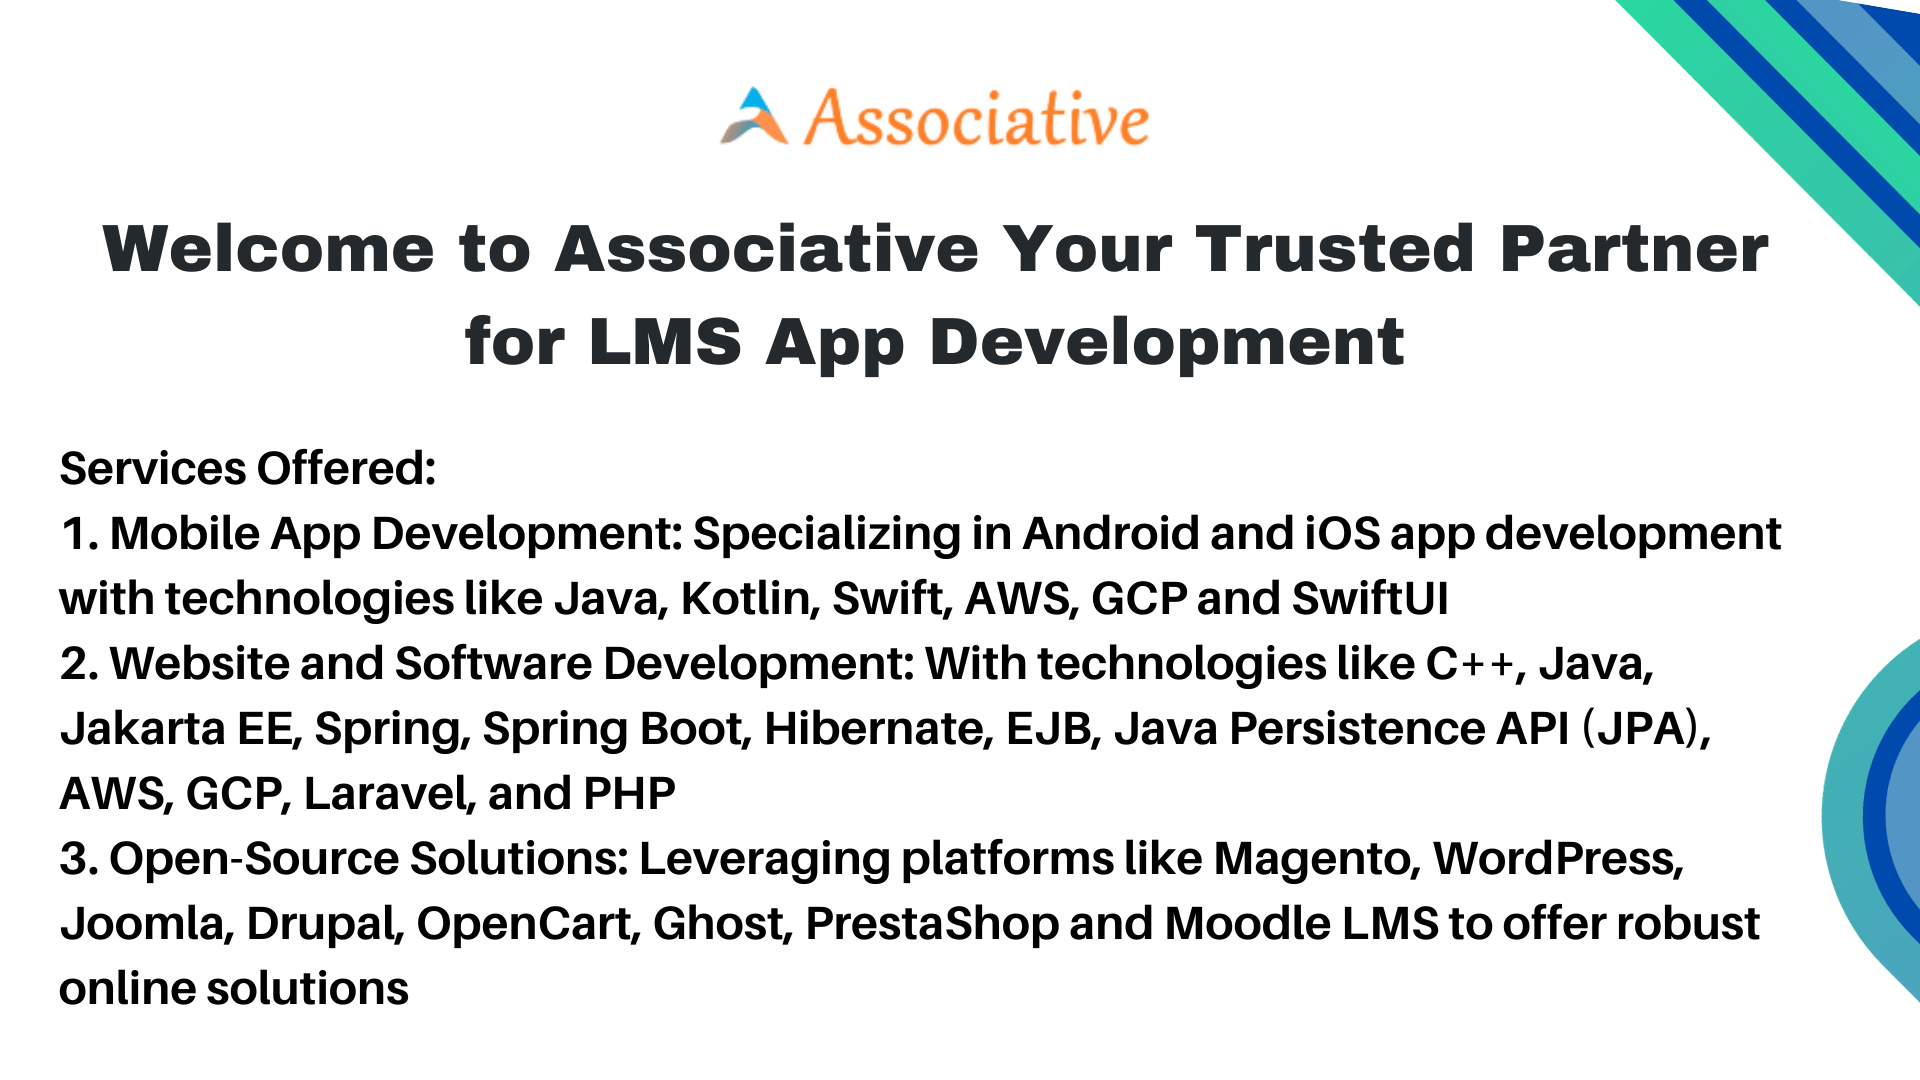 Welcome to Associative Your Trusted Partner for LMS App Development